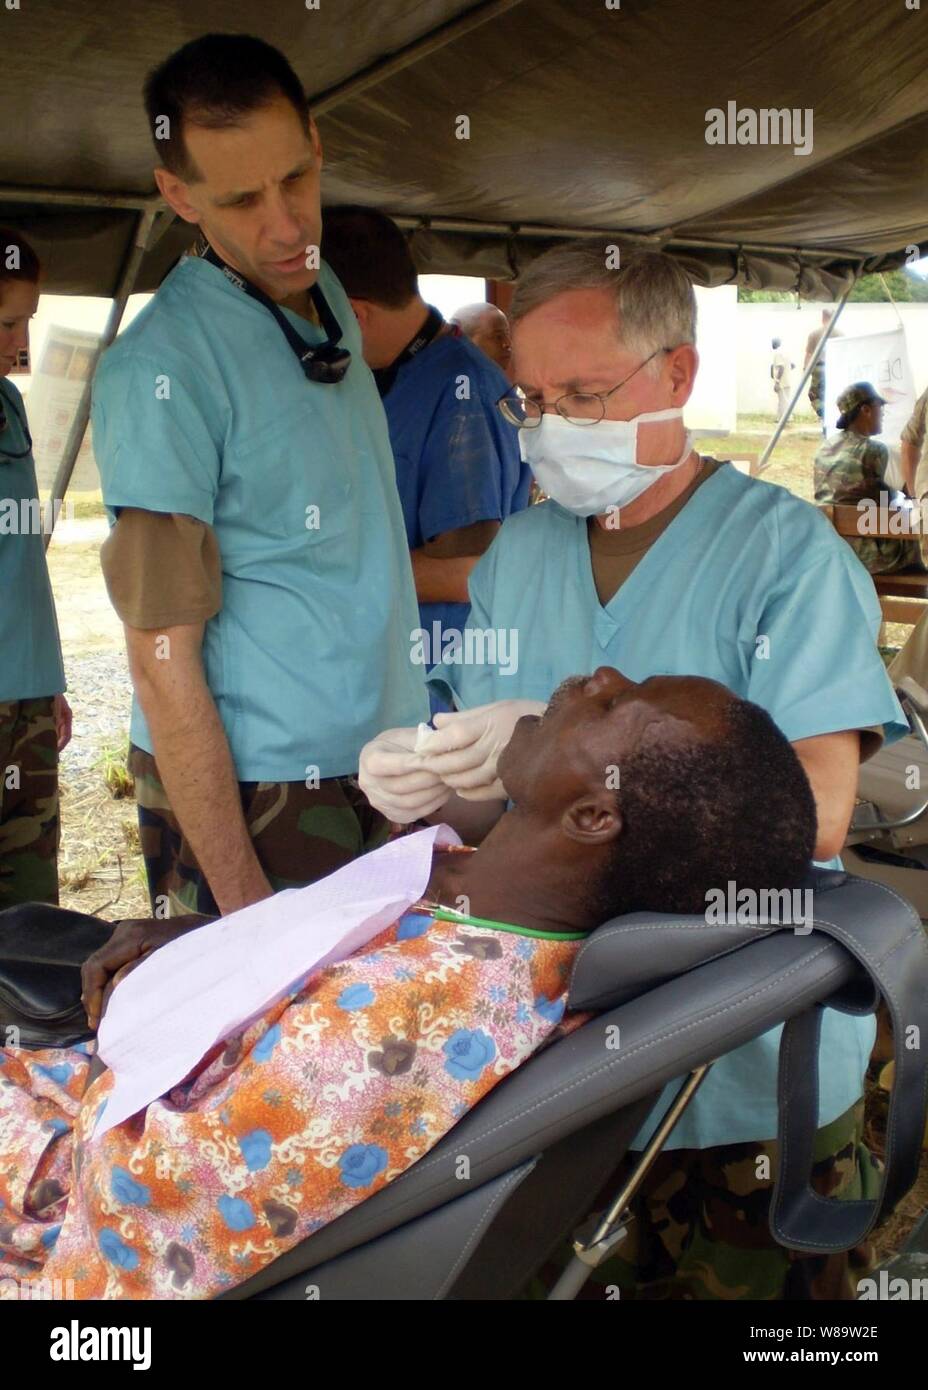 U.S. Navy Cmdr. David Greenman (left) and Capt. Tom Patton examine a patient during a medical civic action program in Bifoun, Gabon, on July 6, 2007.  The program is being conducted as part Medflag 07, which is a medical exercise emphasizing joint training with African nations.  The annual exercise provides realistic training environments where participating forces familiarize themselves with the each other's capabilities. Stock Photo